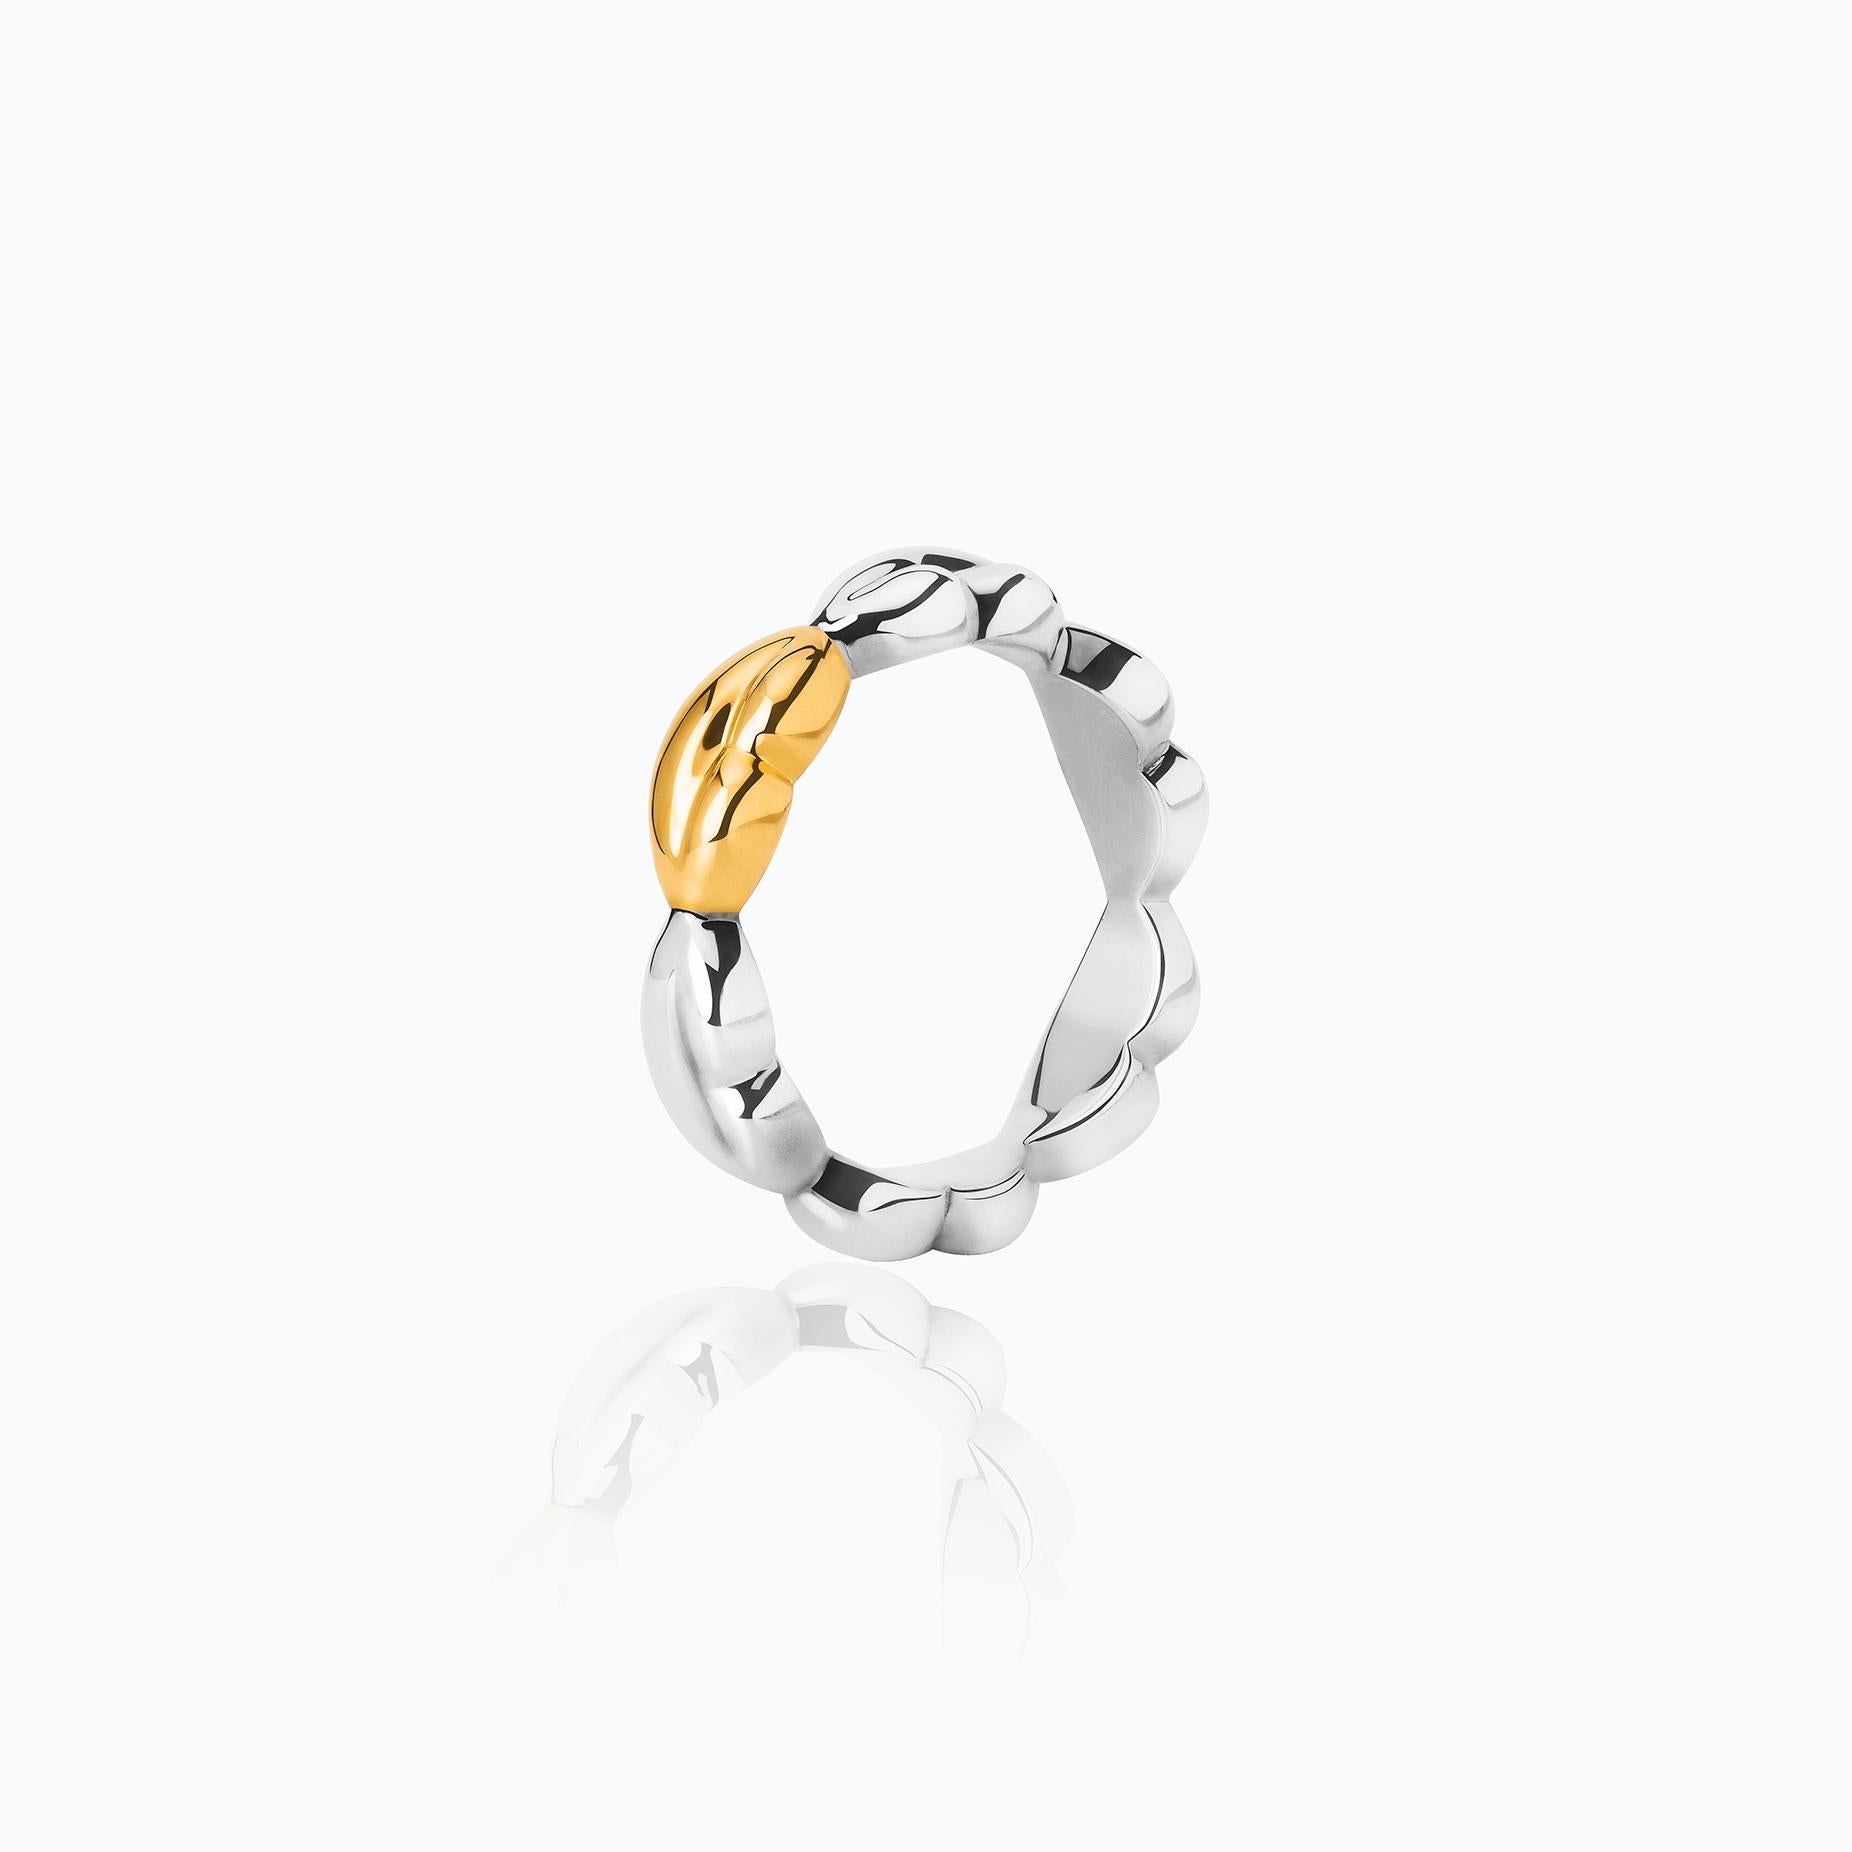 The Bésame Texture Vermeil Ring from the Bésame collection by TANE is made in sterling silver with 23 karat yellow gold vermeil. The piece is made up of a succession of small kisses gently sculpted in TANE's vision fused on the edges. The repetition